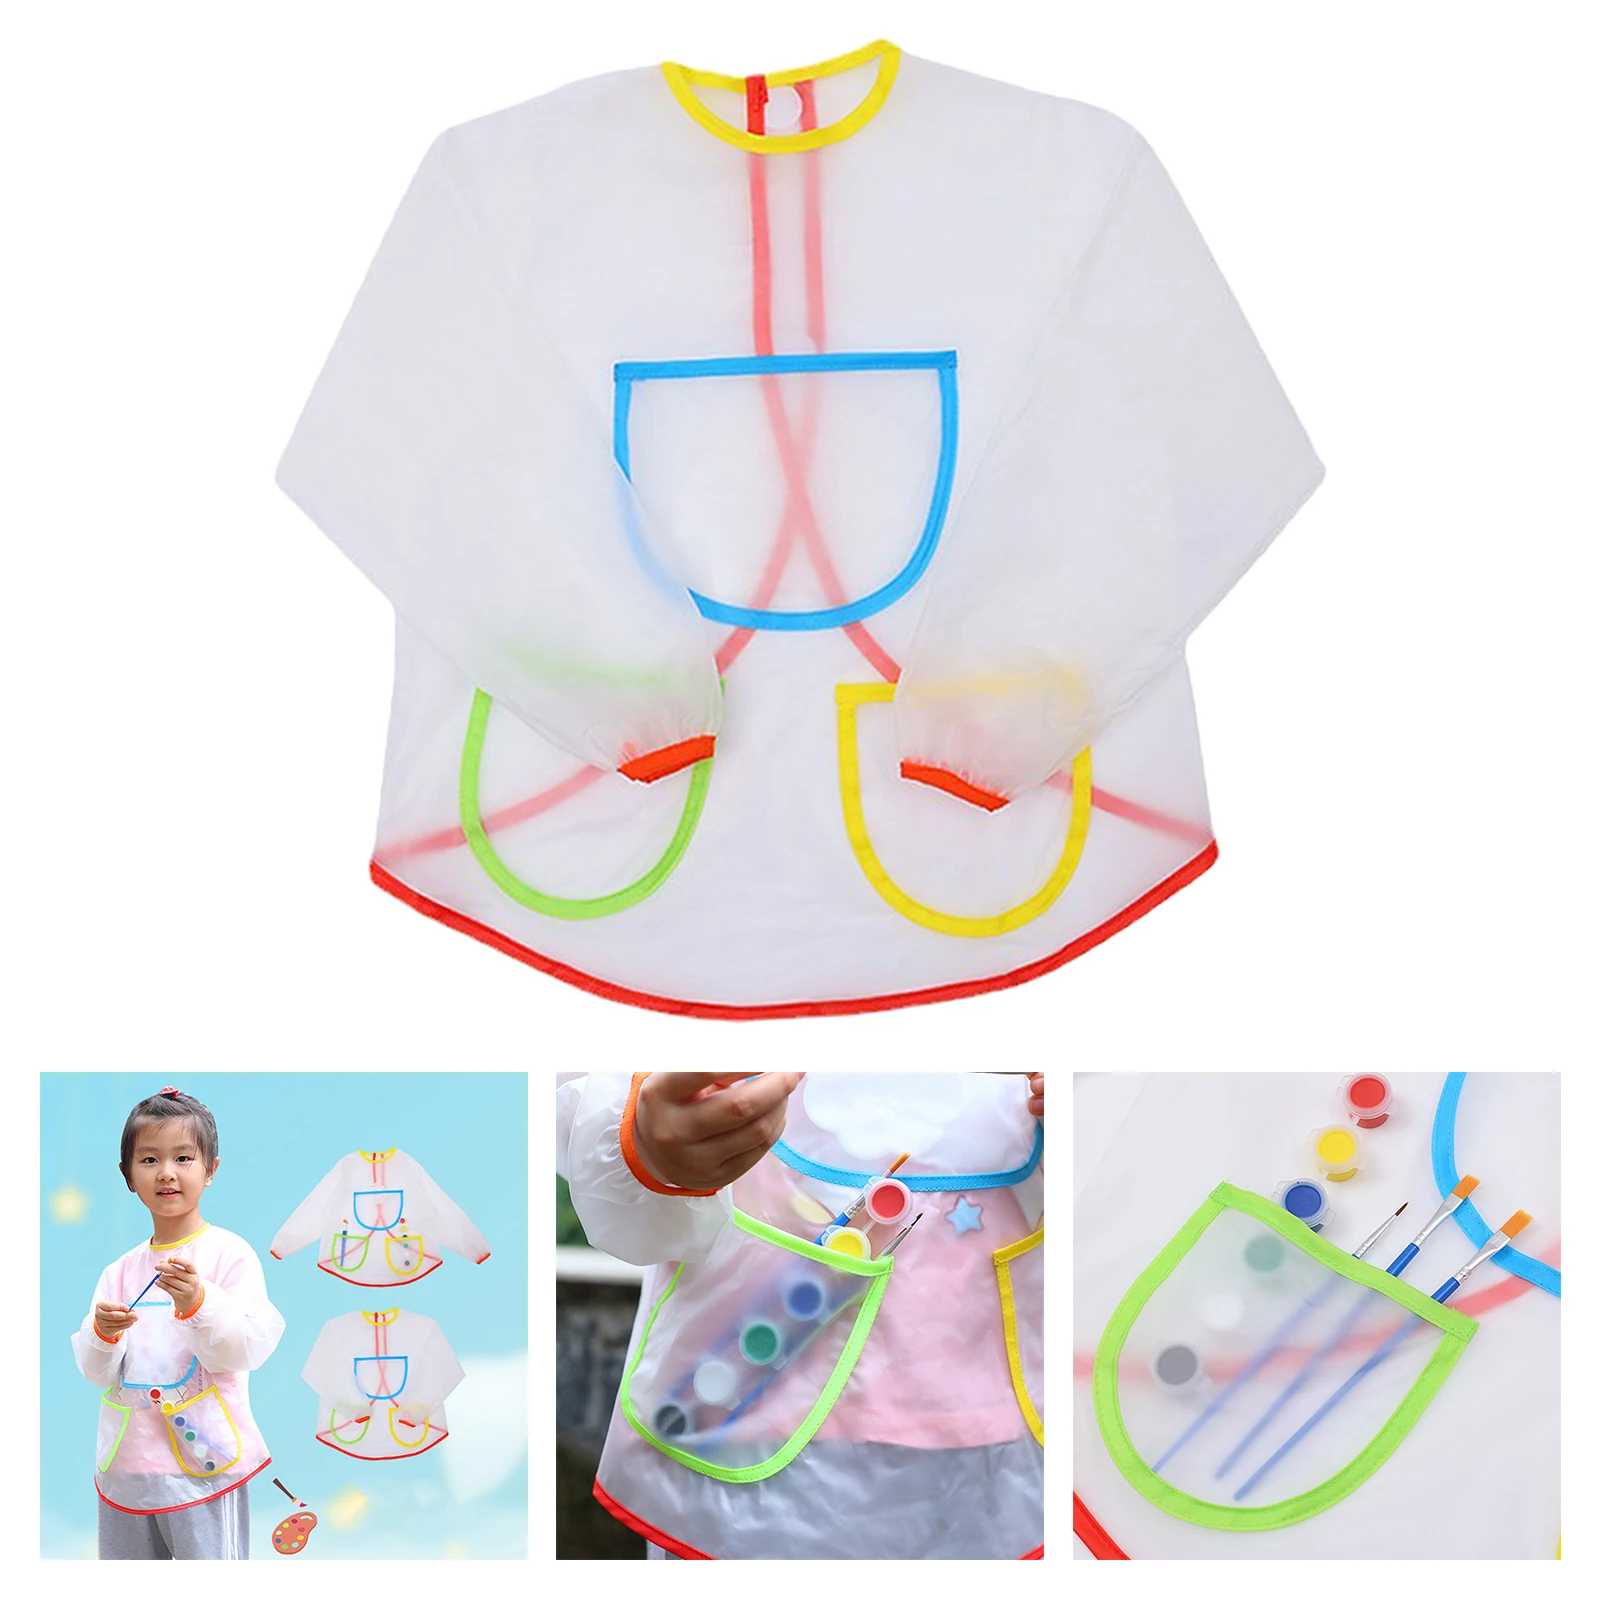 Kids Apron for Painting School Smock for Painting Boy`s and Girl`s Portable Long Sleeve Waterproof Child Art Apron